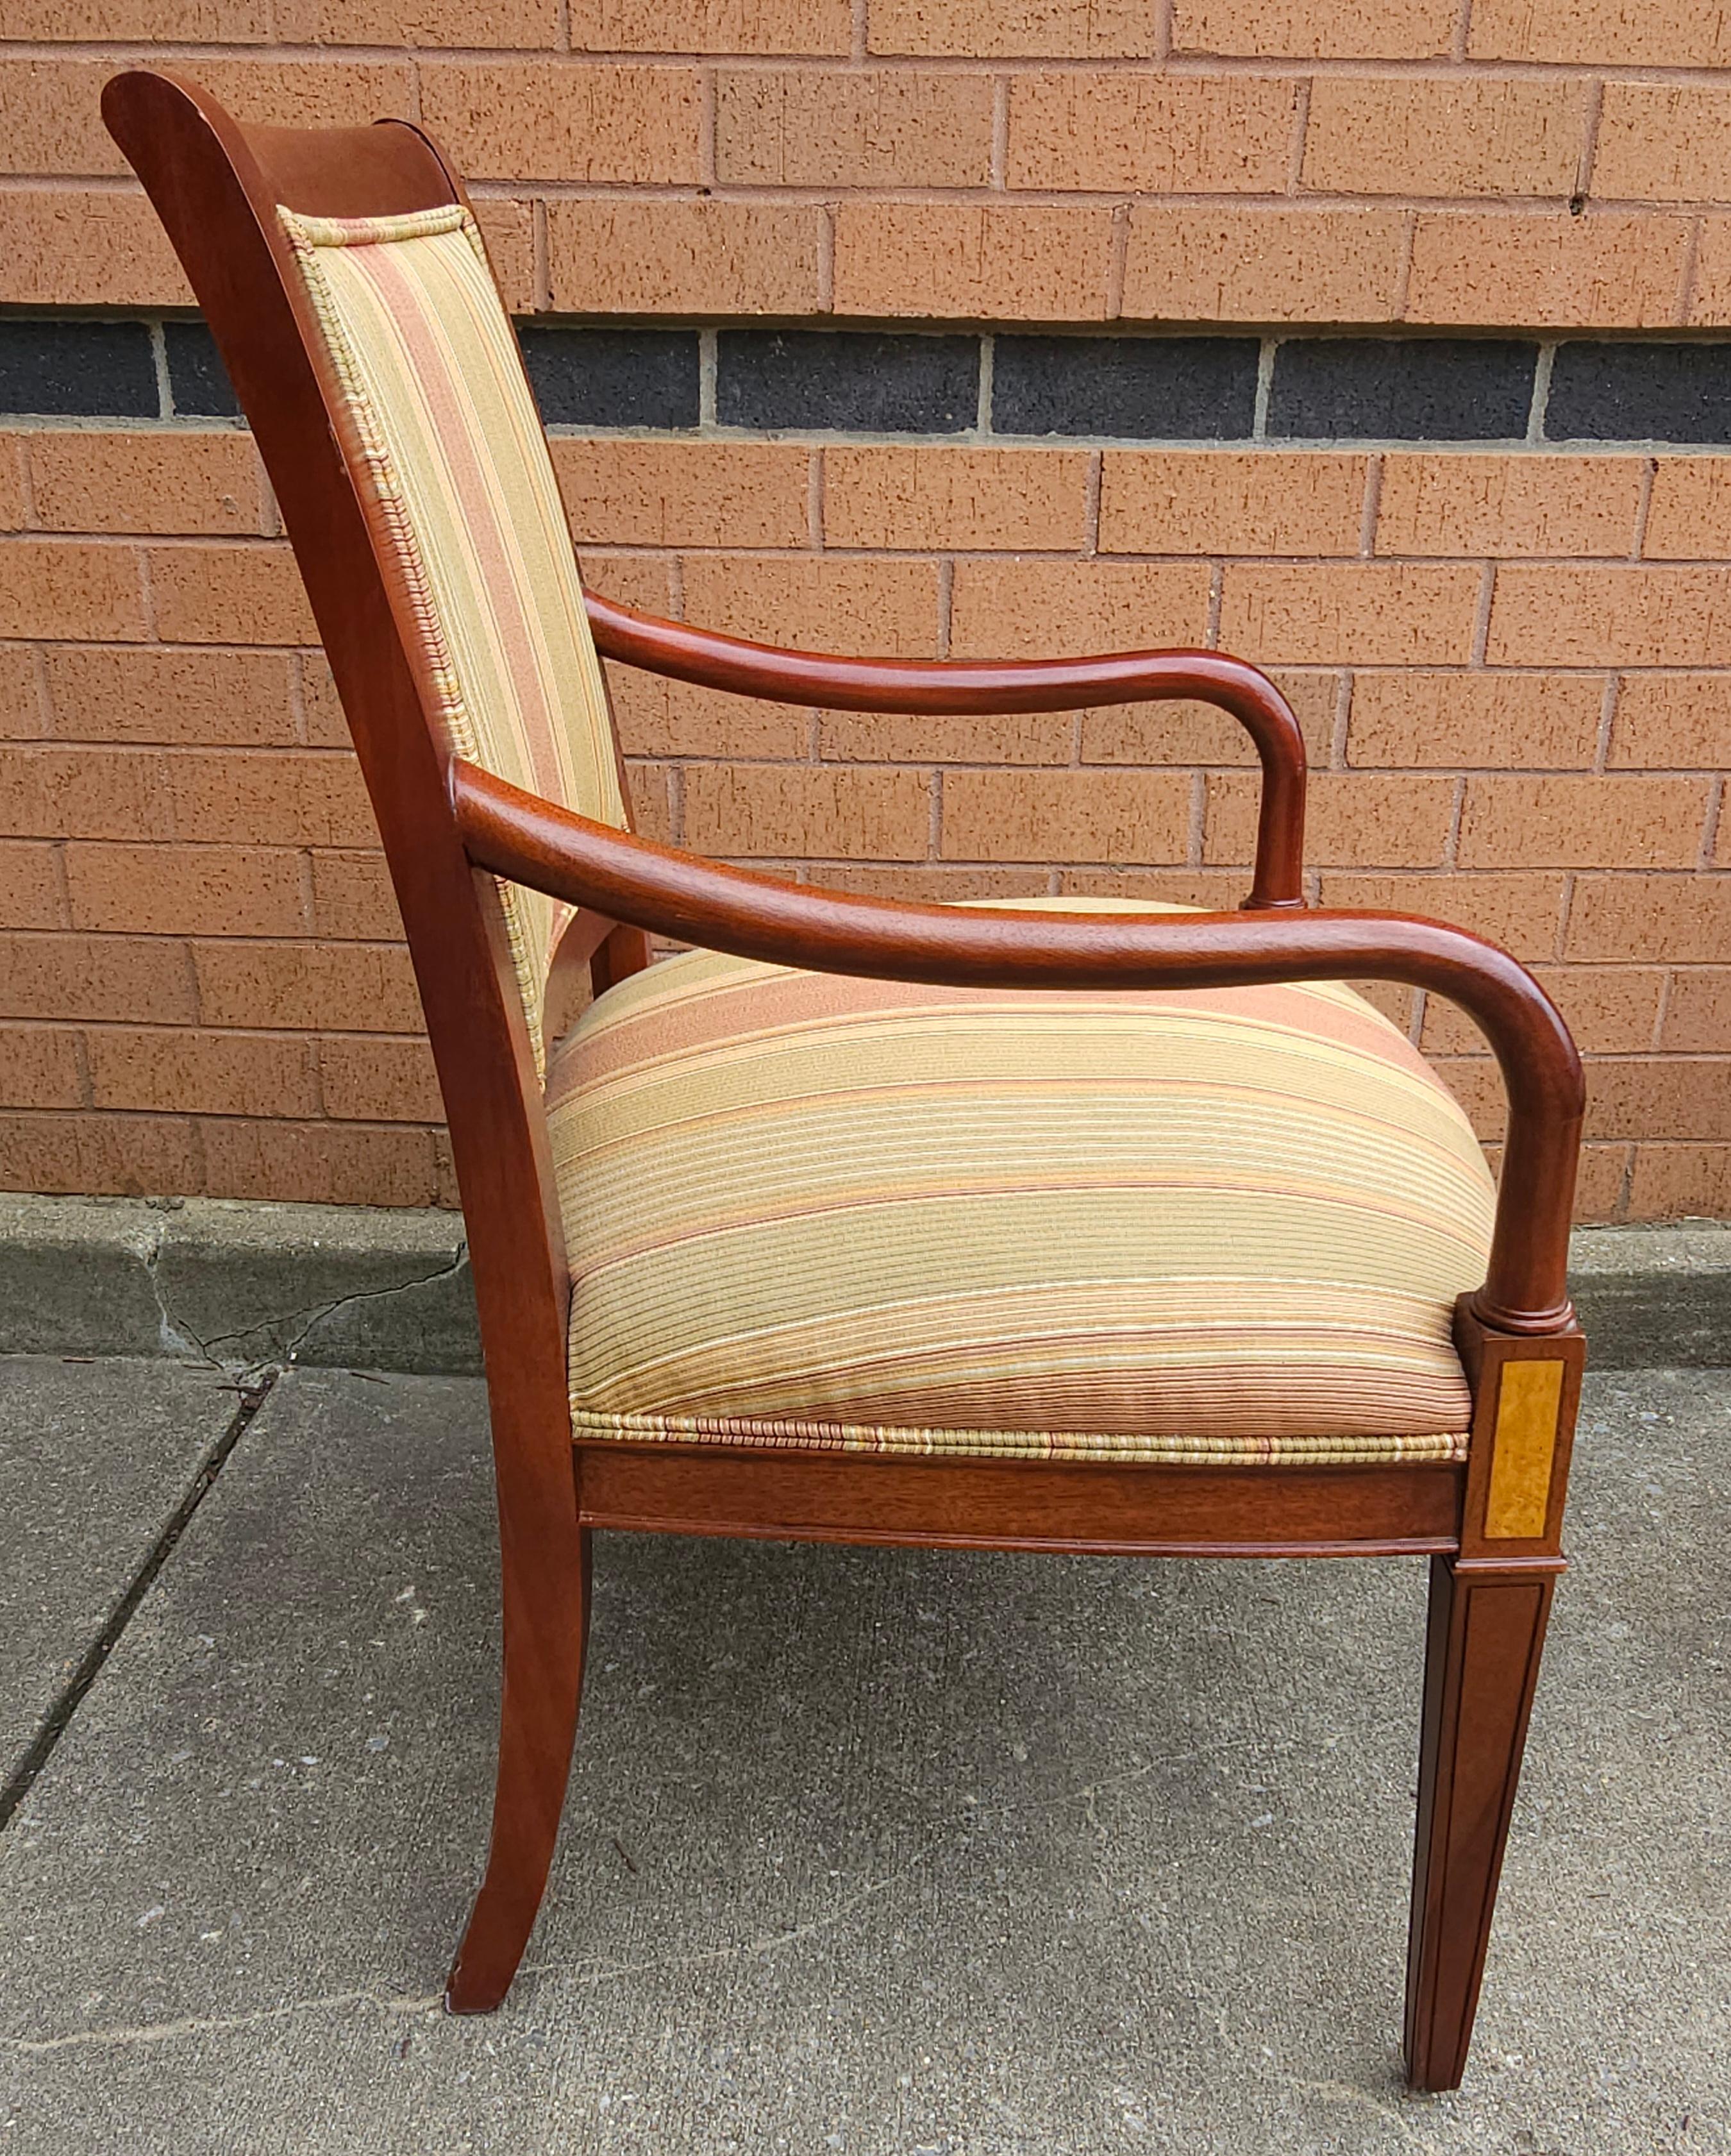 20th Century Pair Hickory Chair Federal Style Mahogany & Inlay Upholstered Mahogany Armchairs For Sale